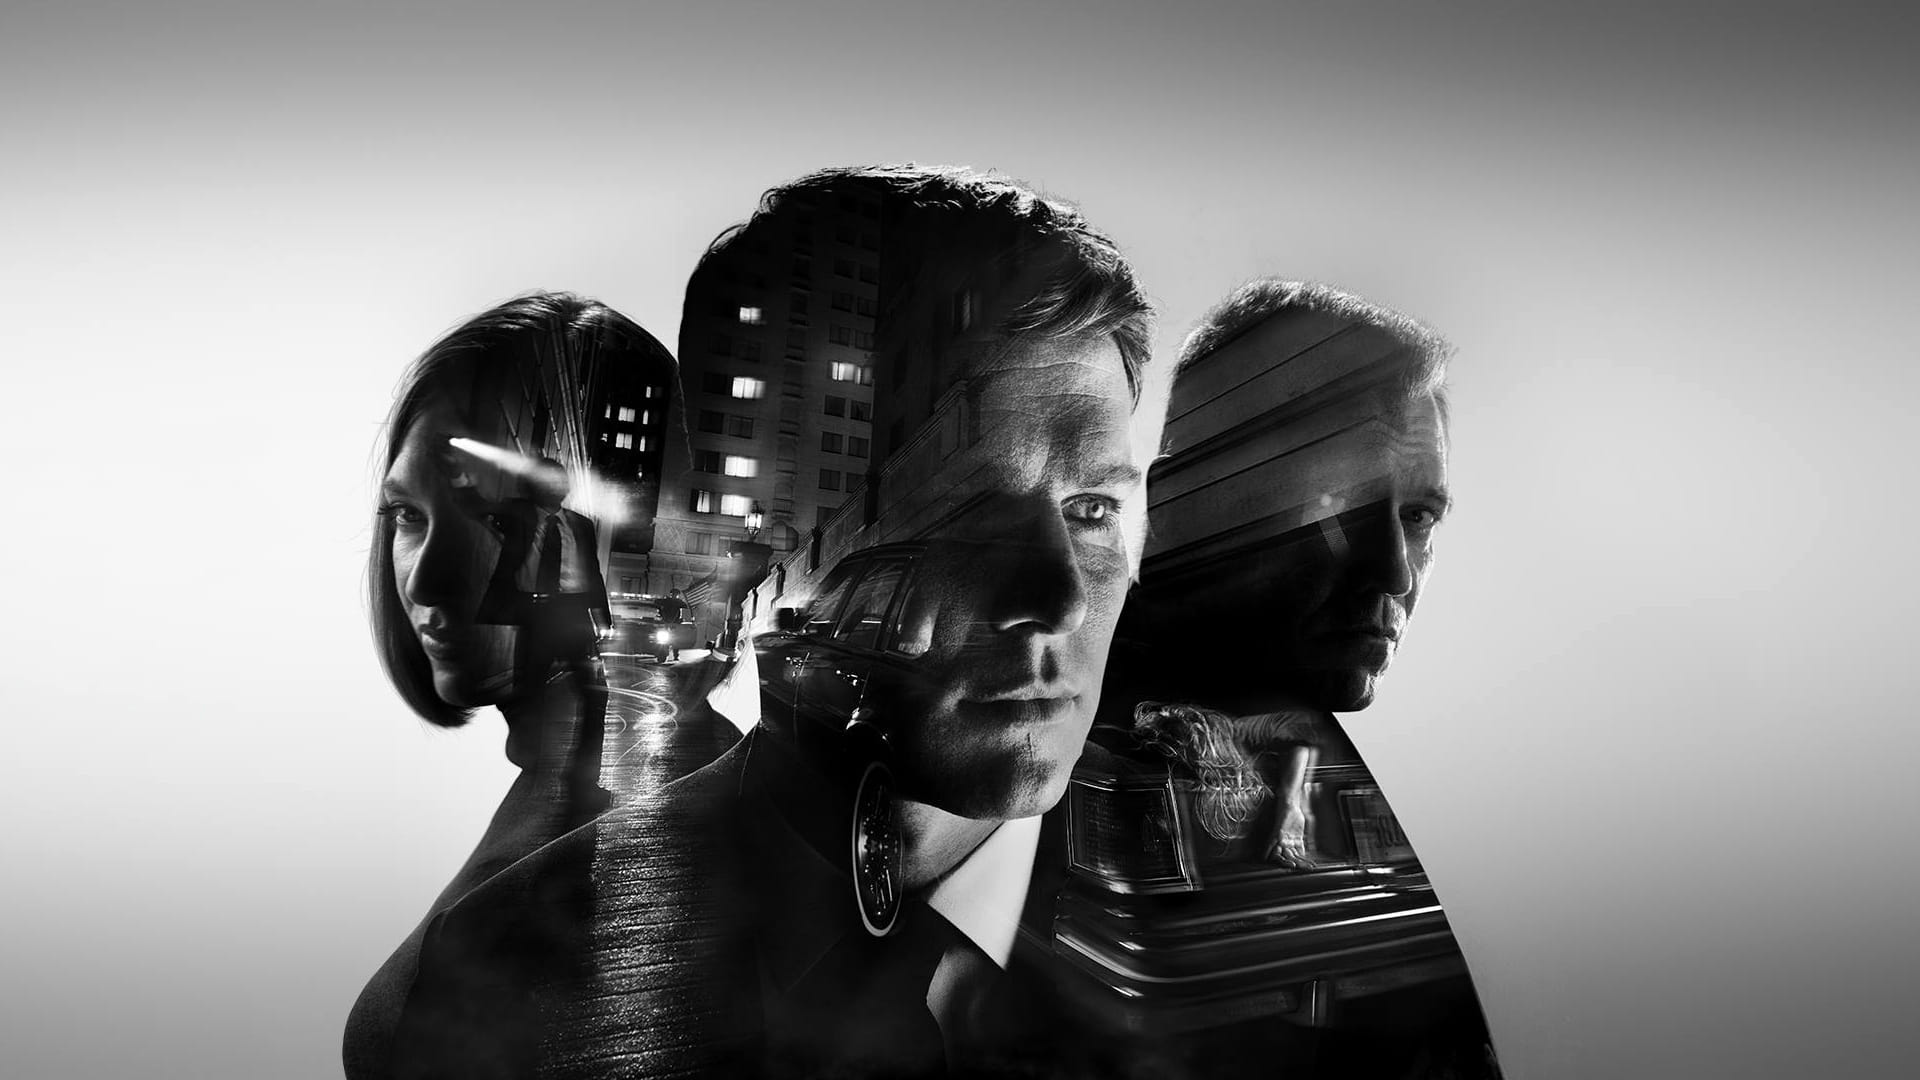 TV Show Mindhunter HD Wallpaper | Background Image